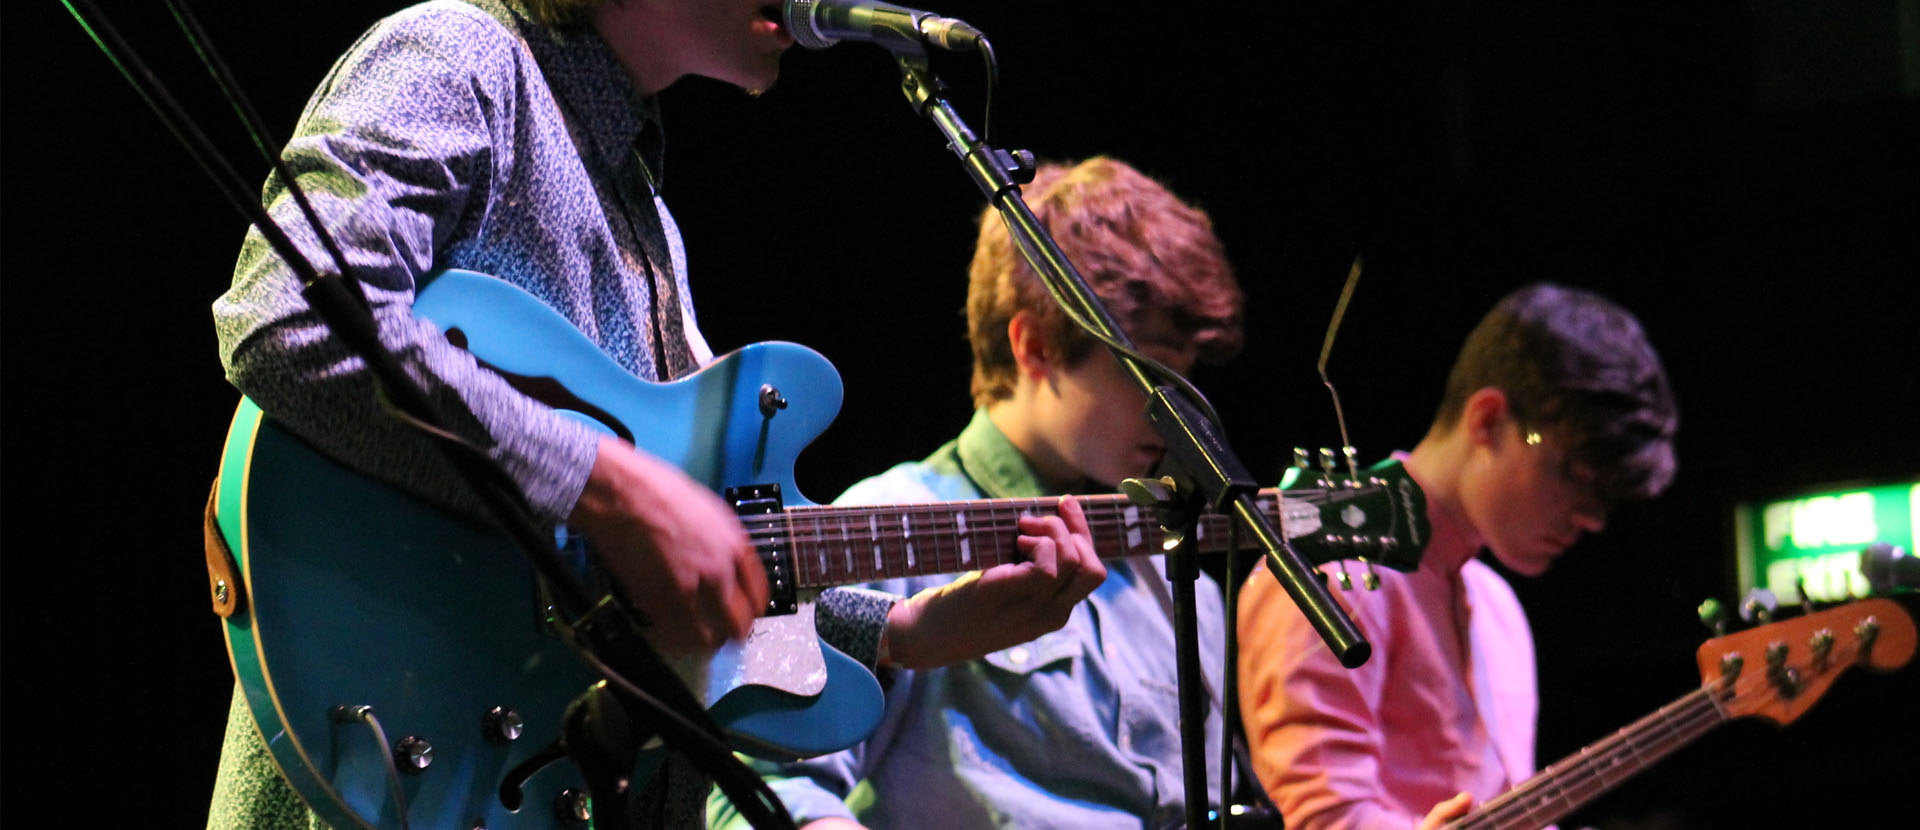 Solent music students performing on stage playing the guitar